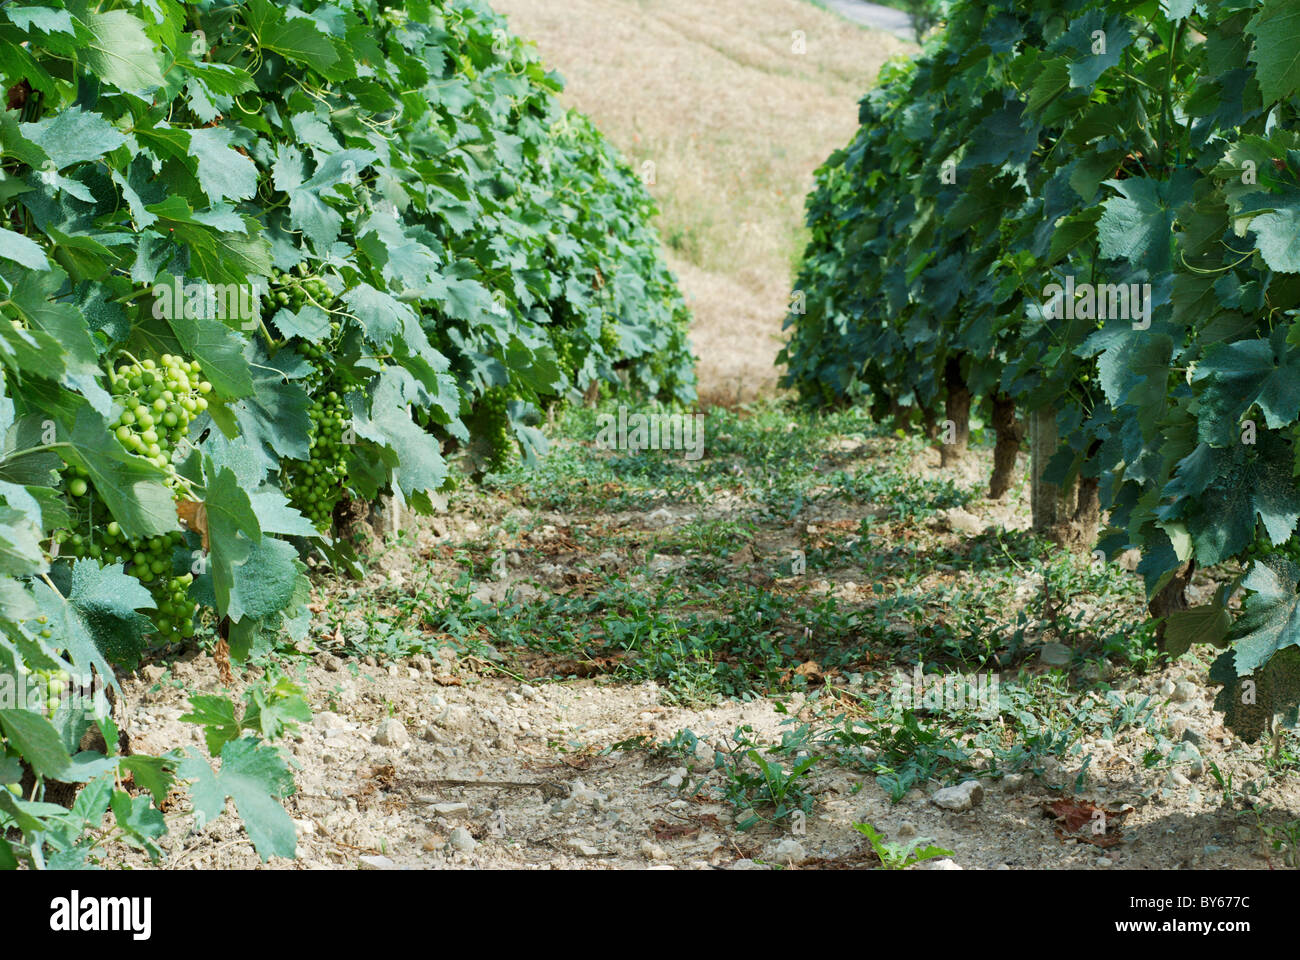 Vineyard with small green grapes on plant Stock Photo